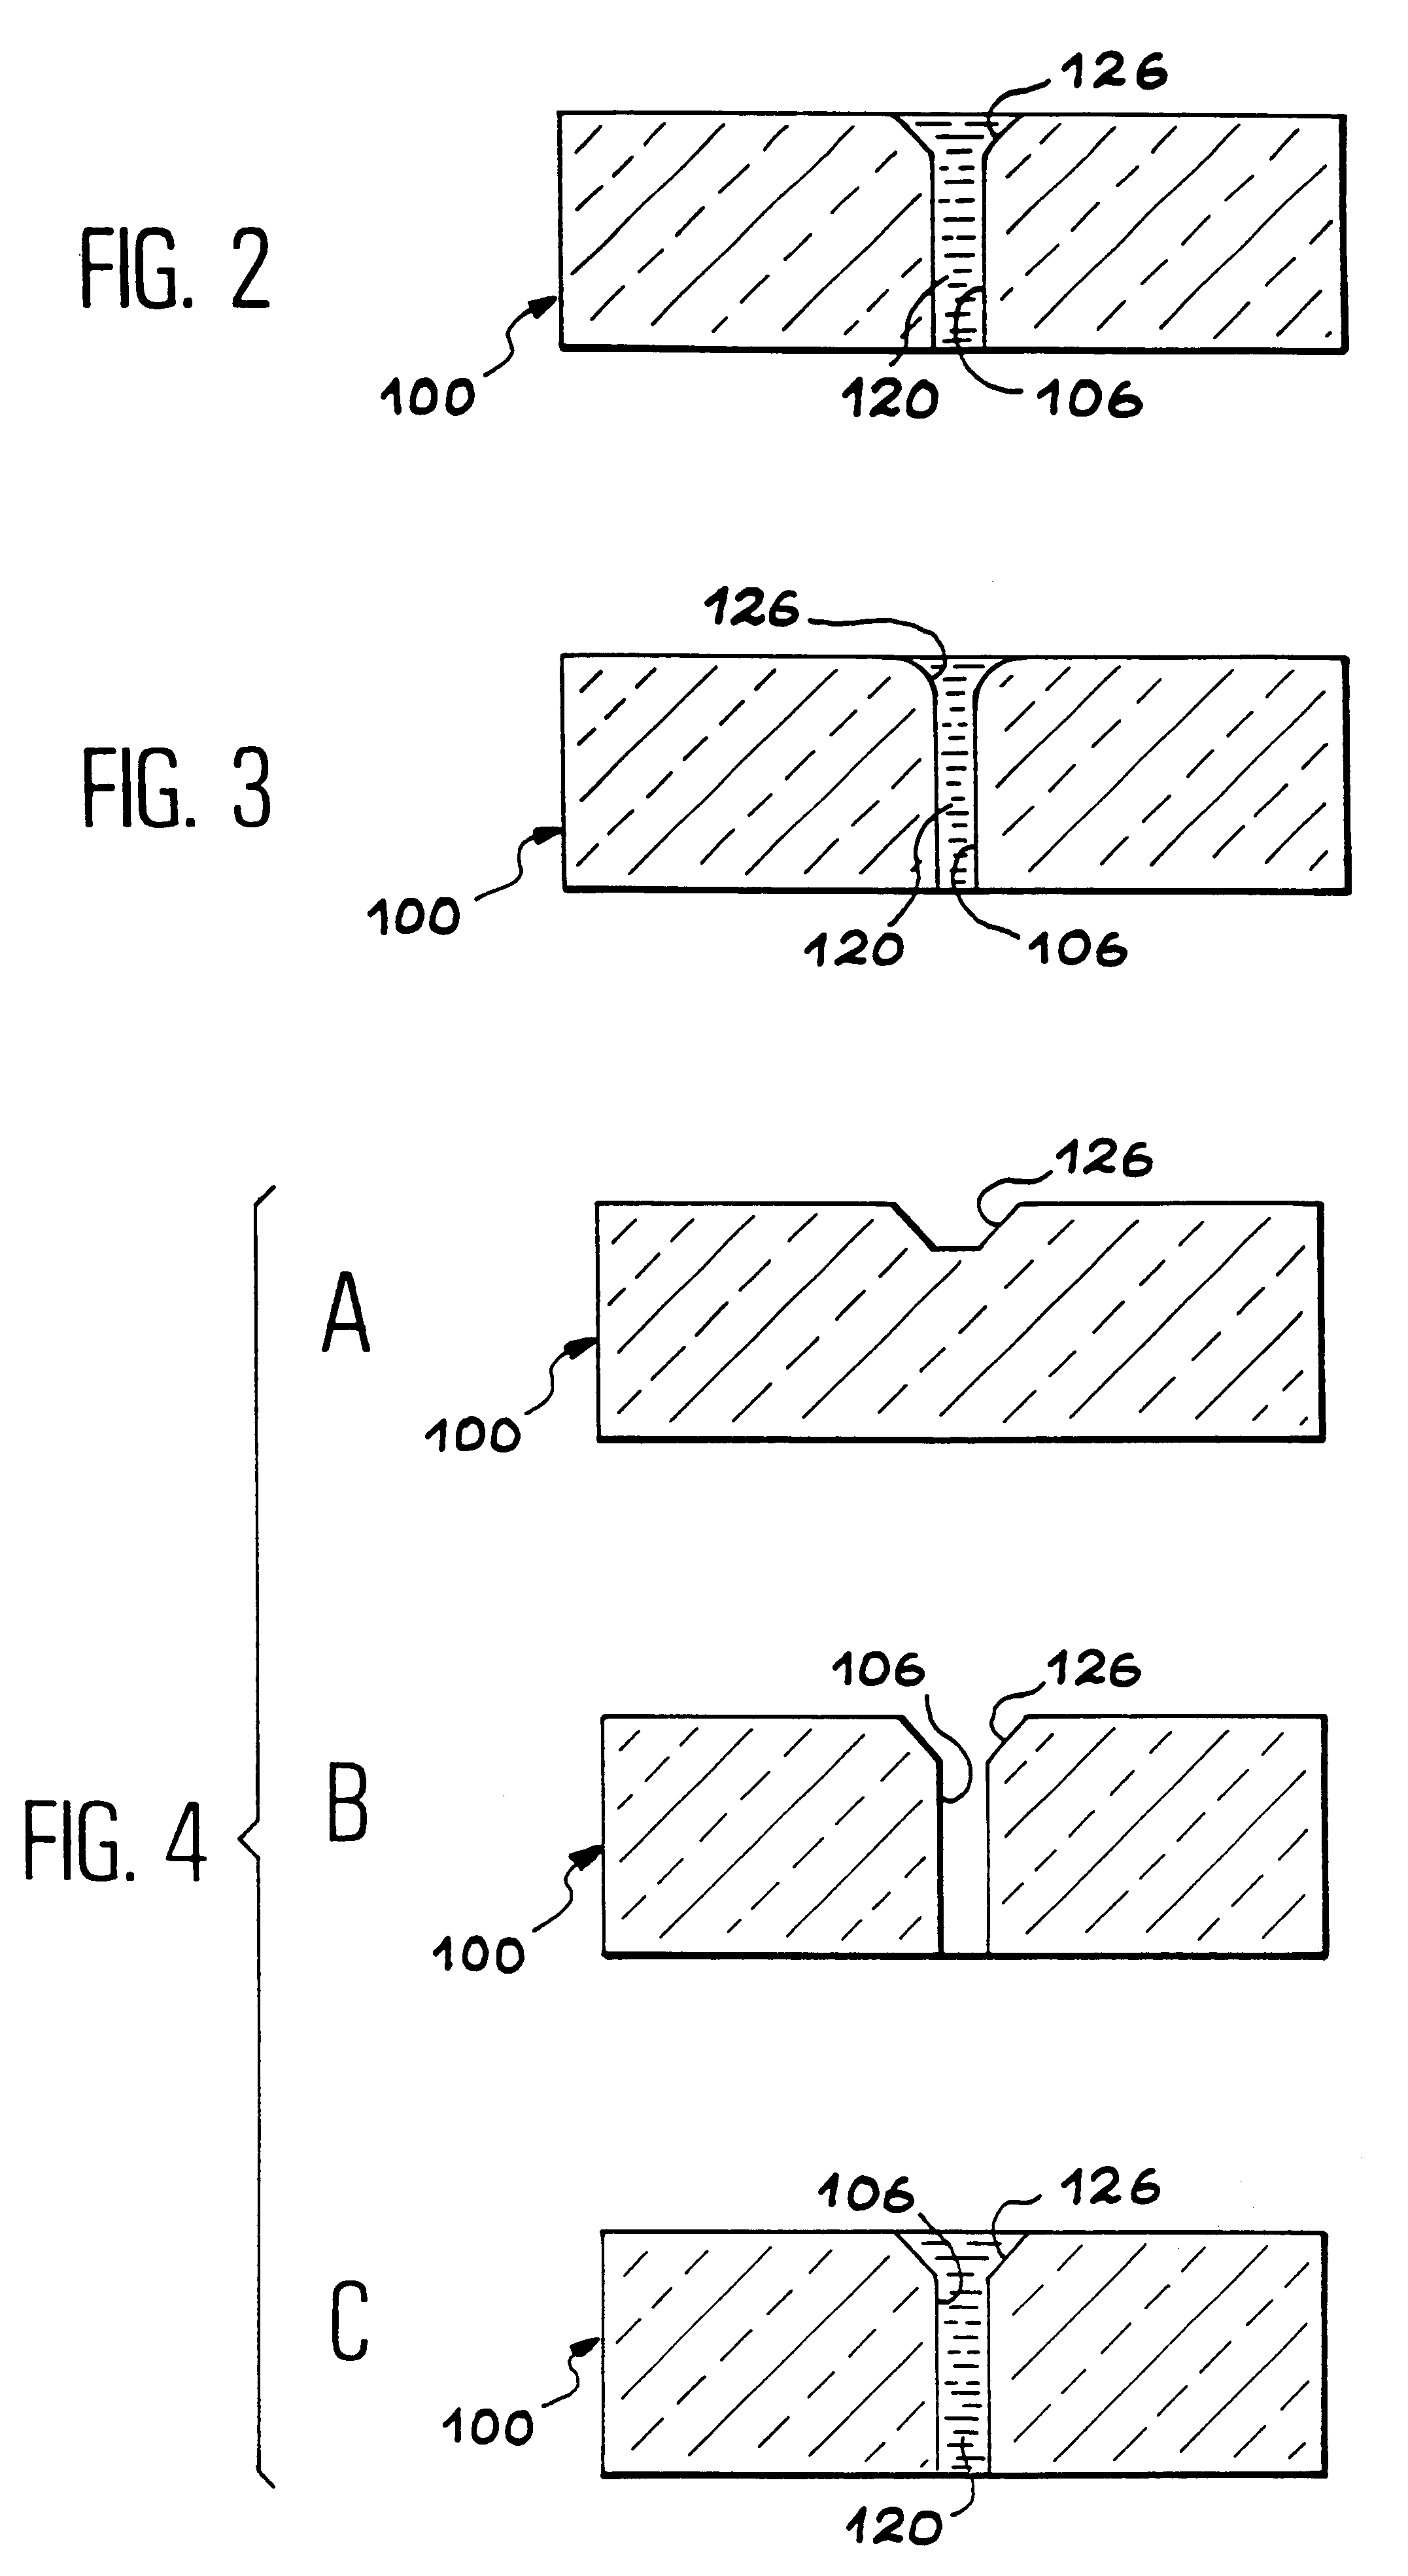 Process for physical isolation of regions of a substrate board